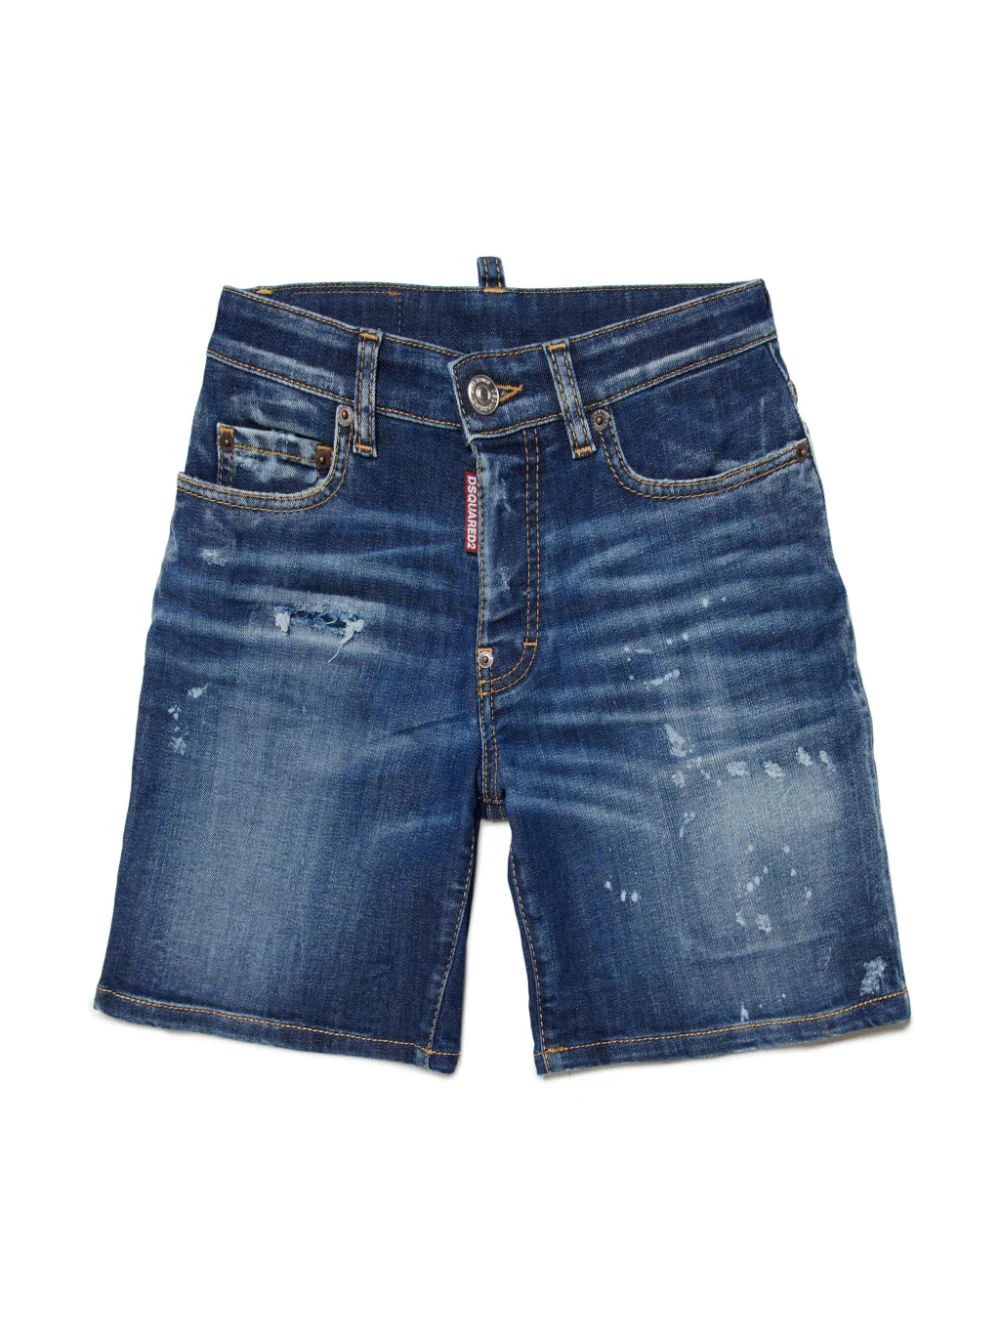 Dsquared2 Kidsdistressed denim shorts$196Import duties included | Farfetch Global